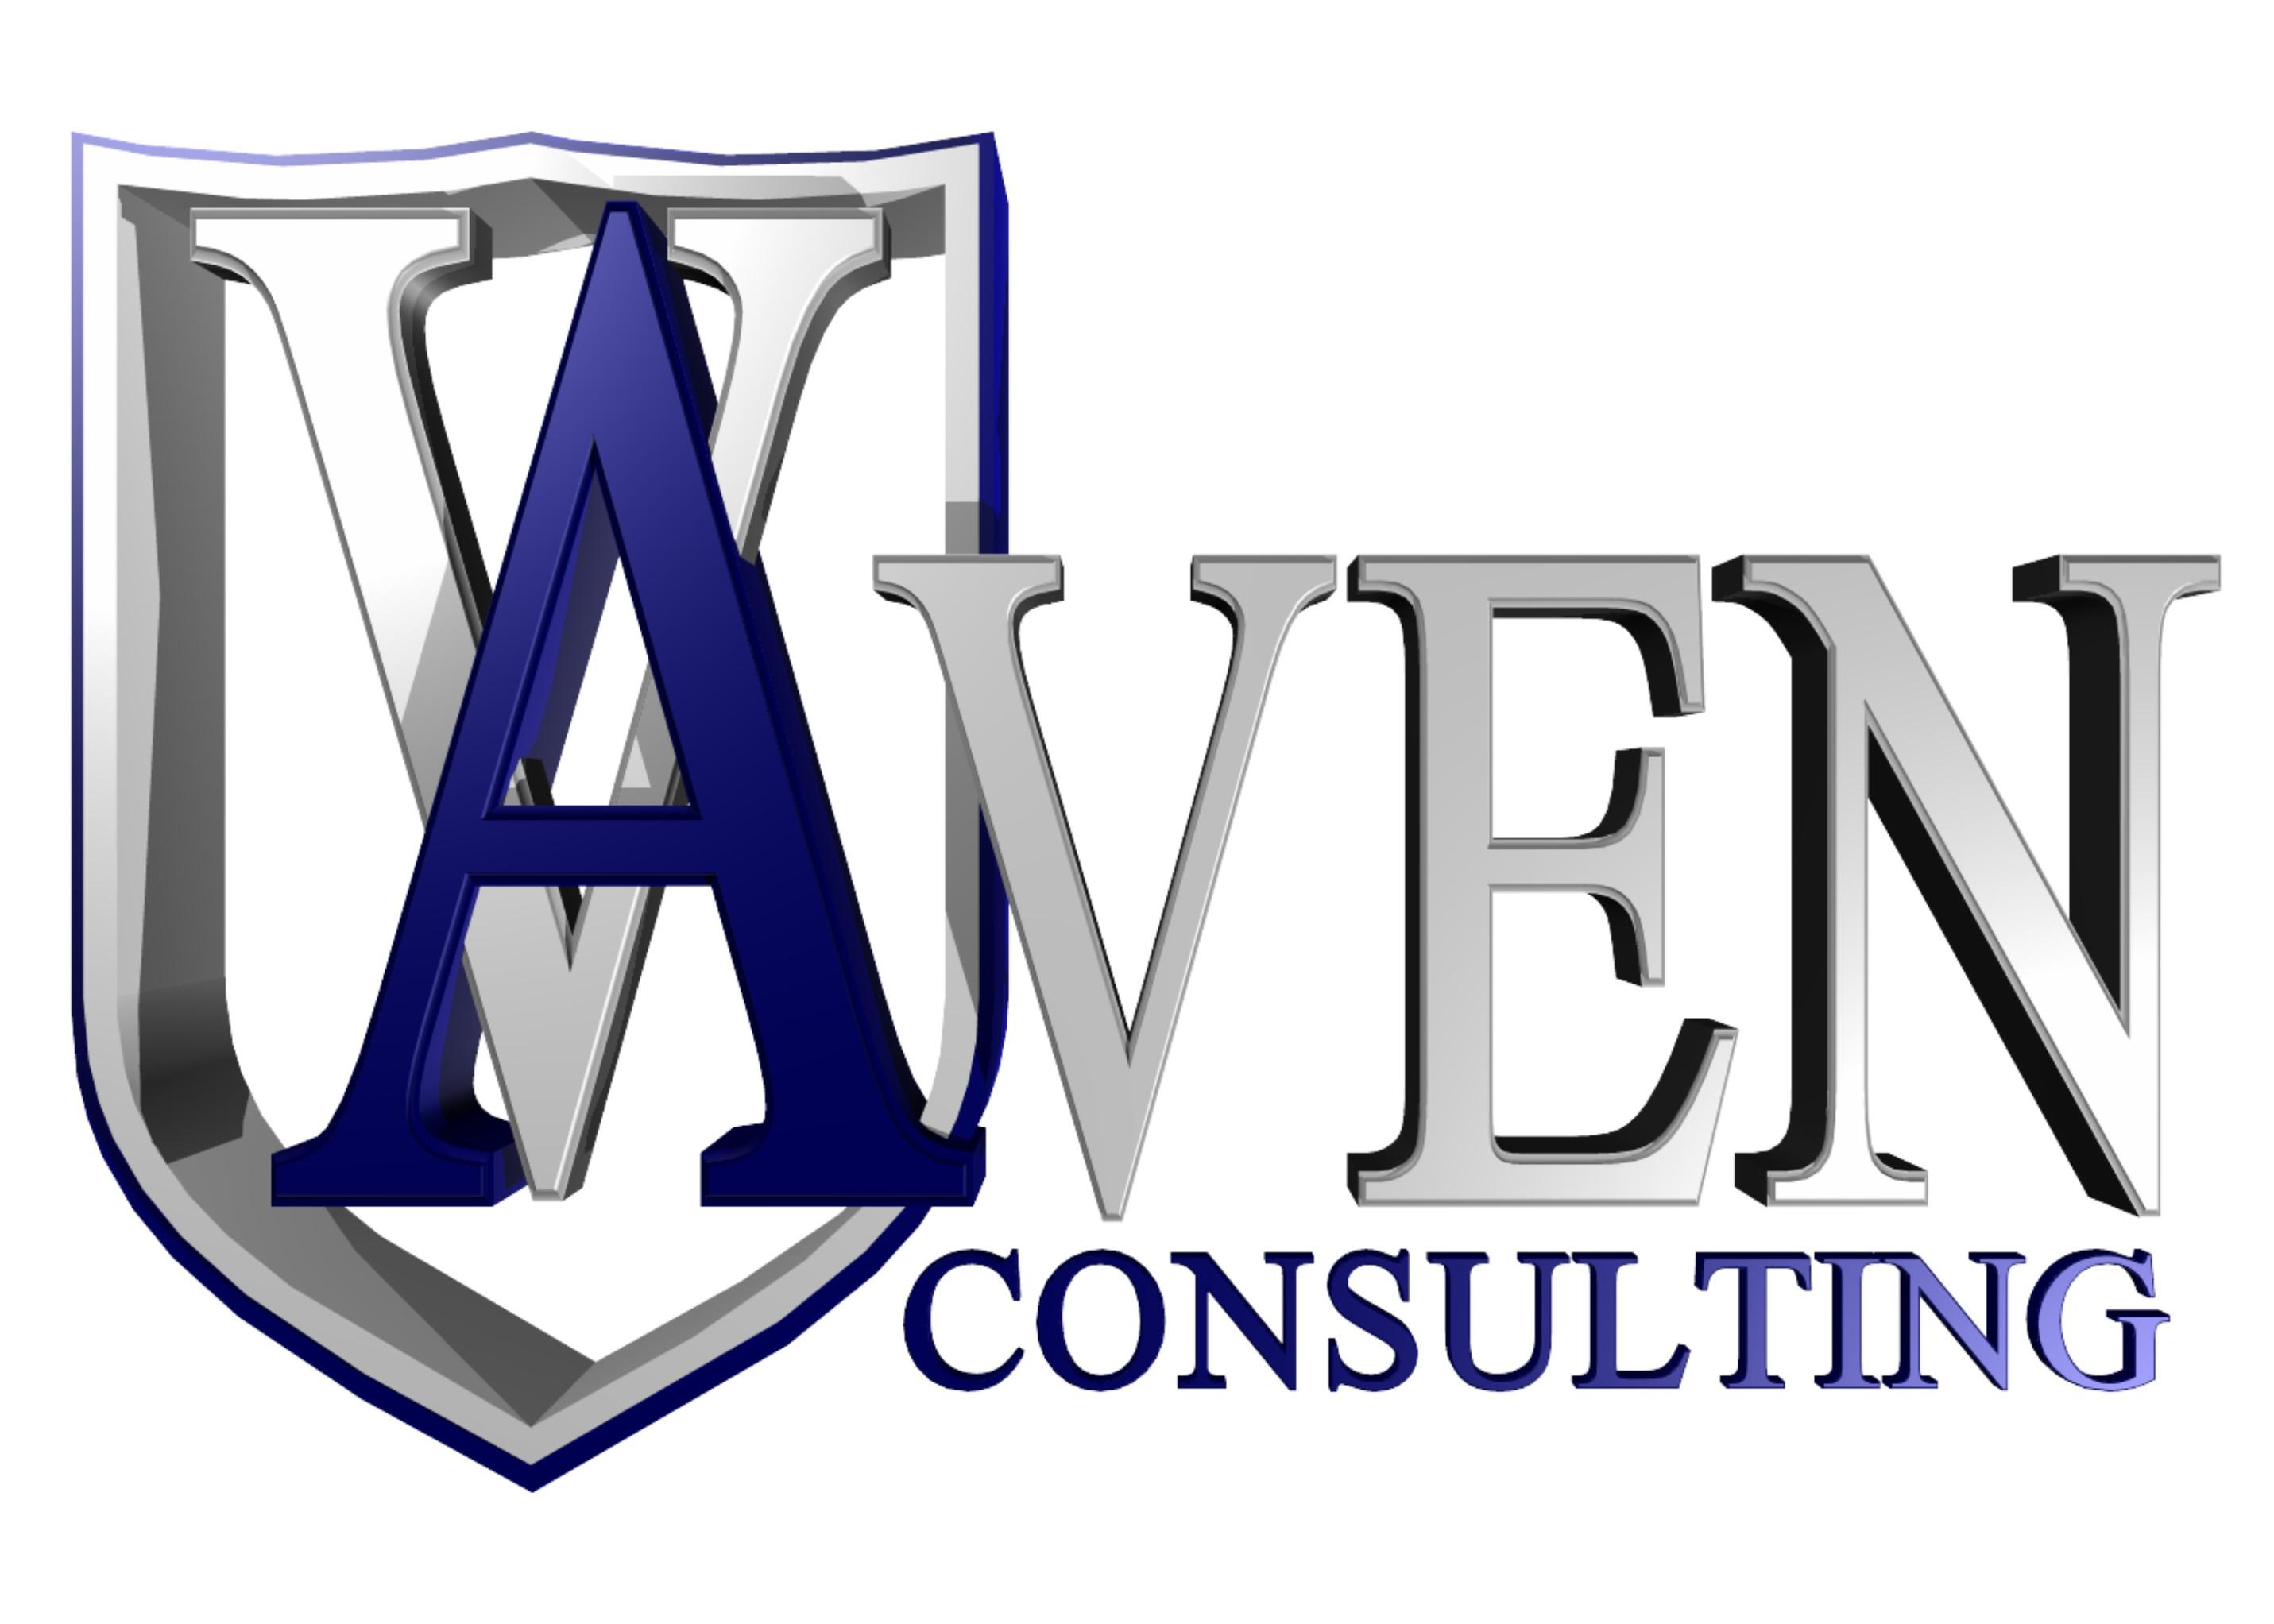 Aven consulting Logo